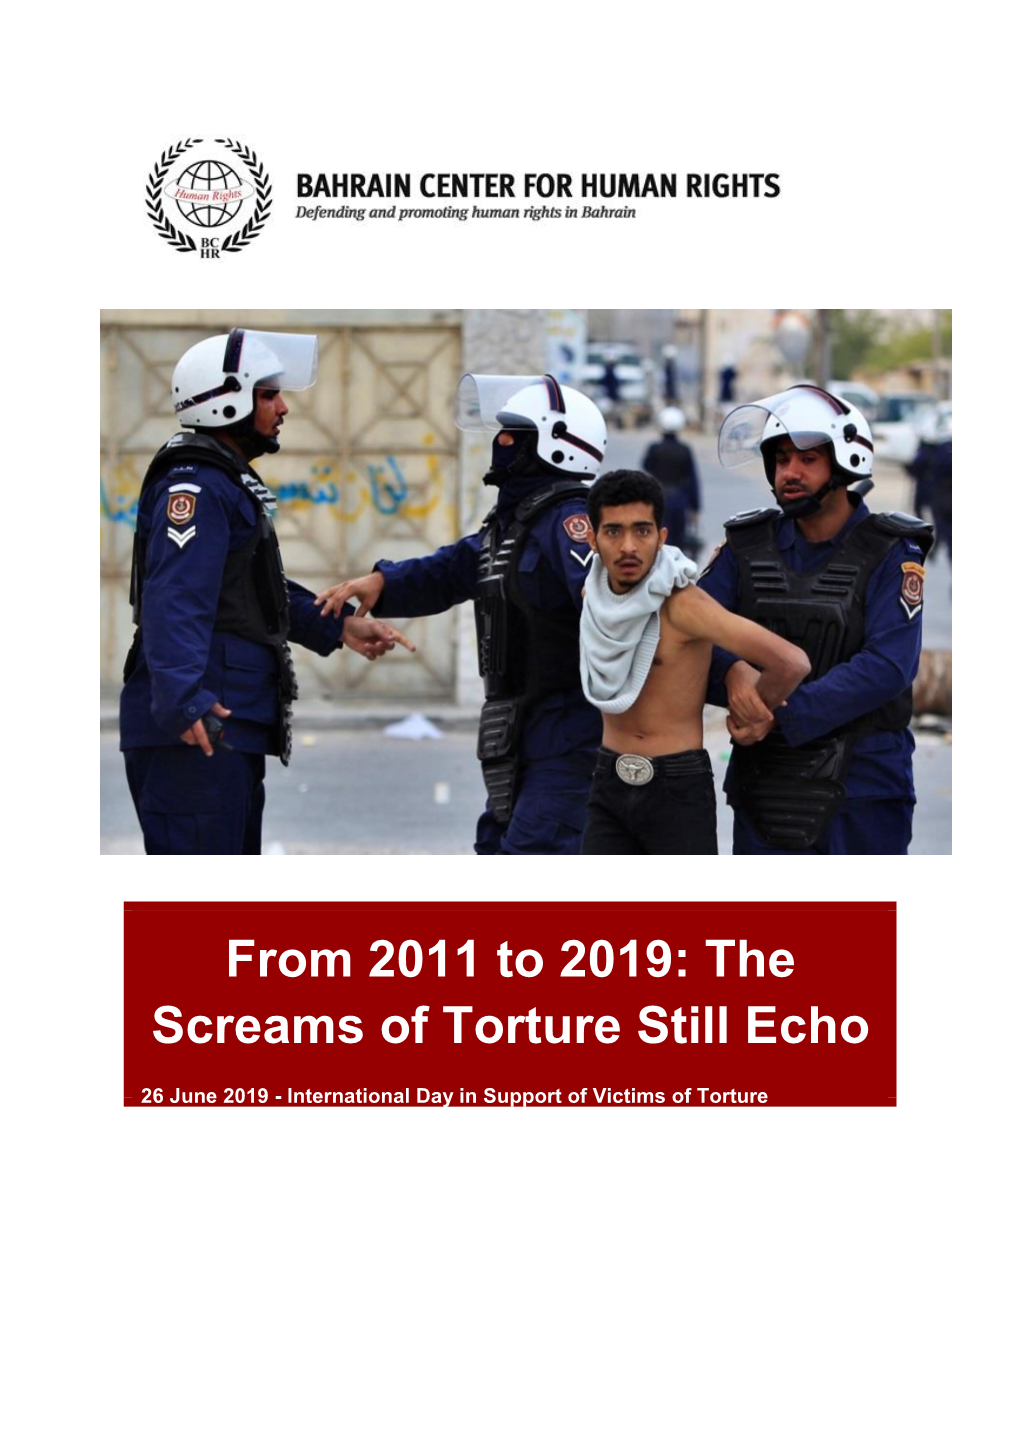 From 2011 to 2019: the Screams of Torture Still Echo